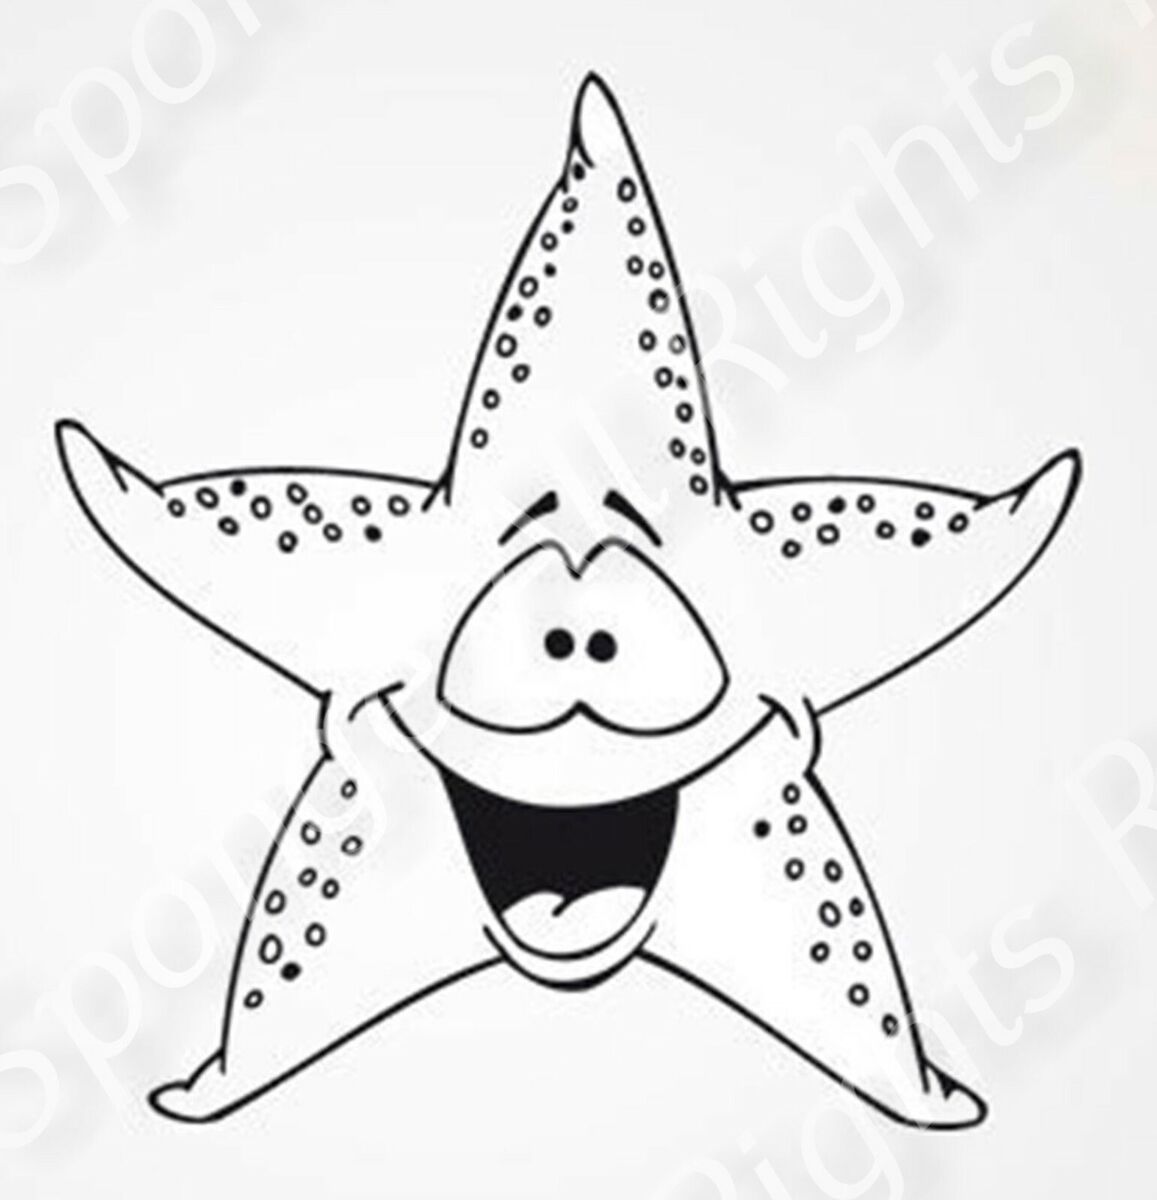 Happy ocean starfish reusable stencil a a a craft kids child room kids